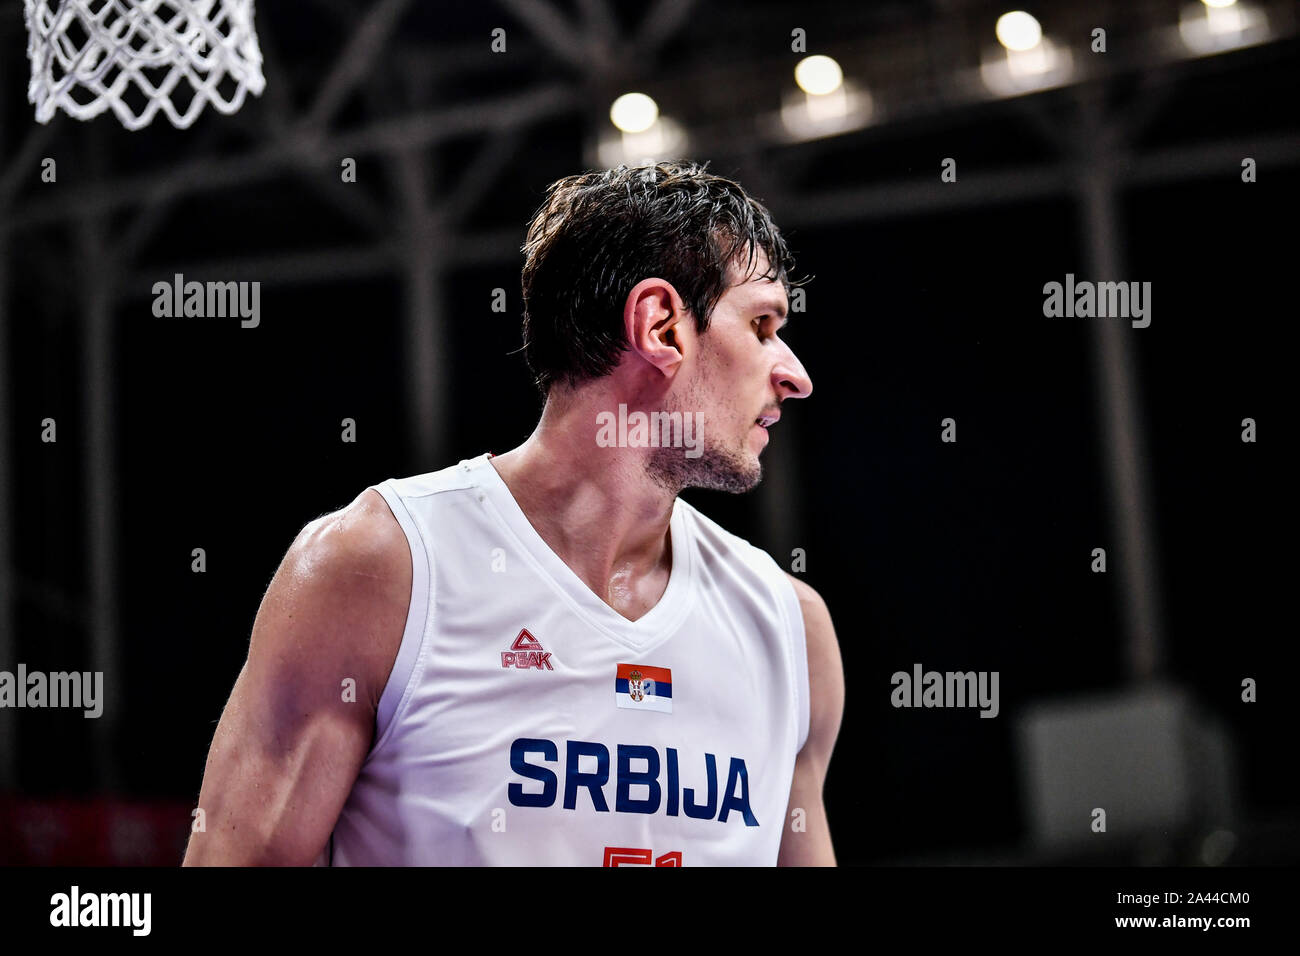 Boban Marjanovic leads Serbia to a win over the Dominican Republic / News 